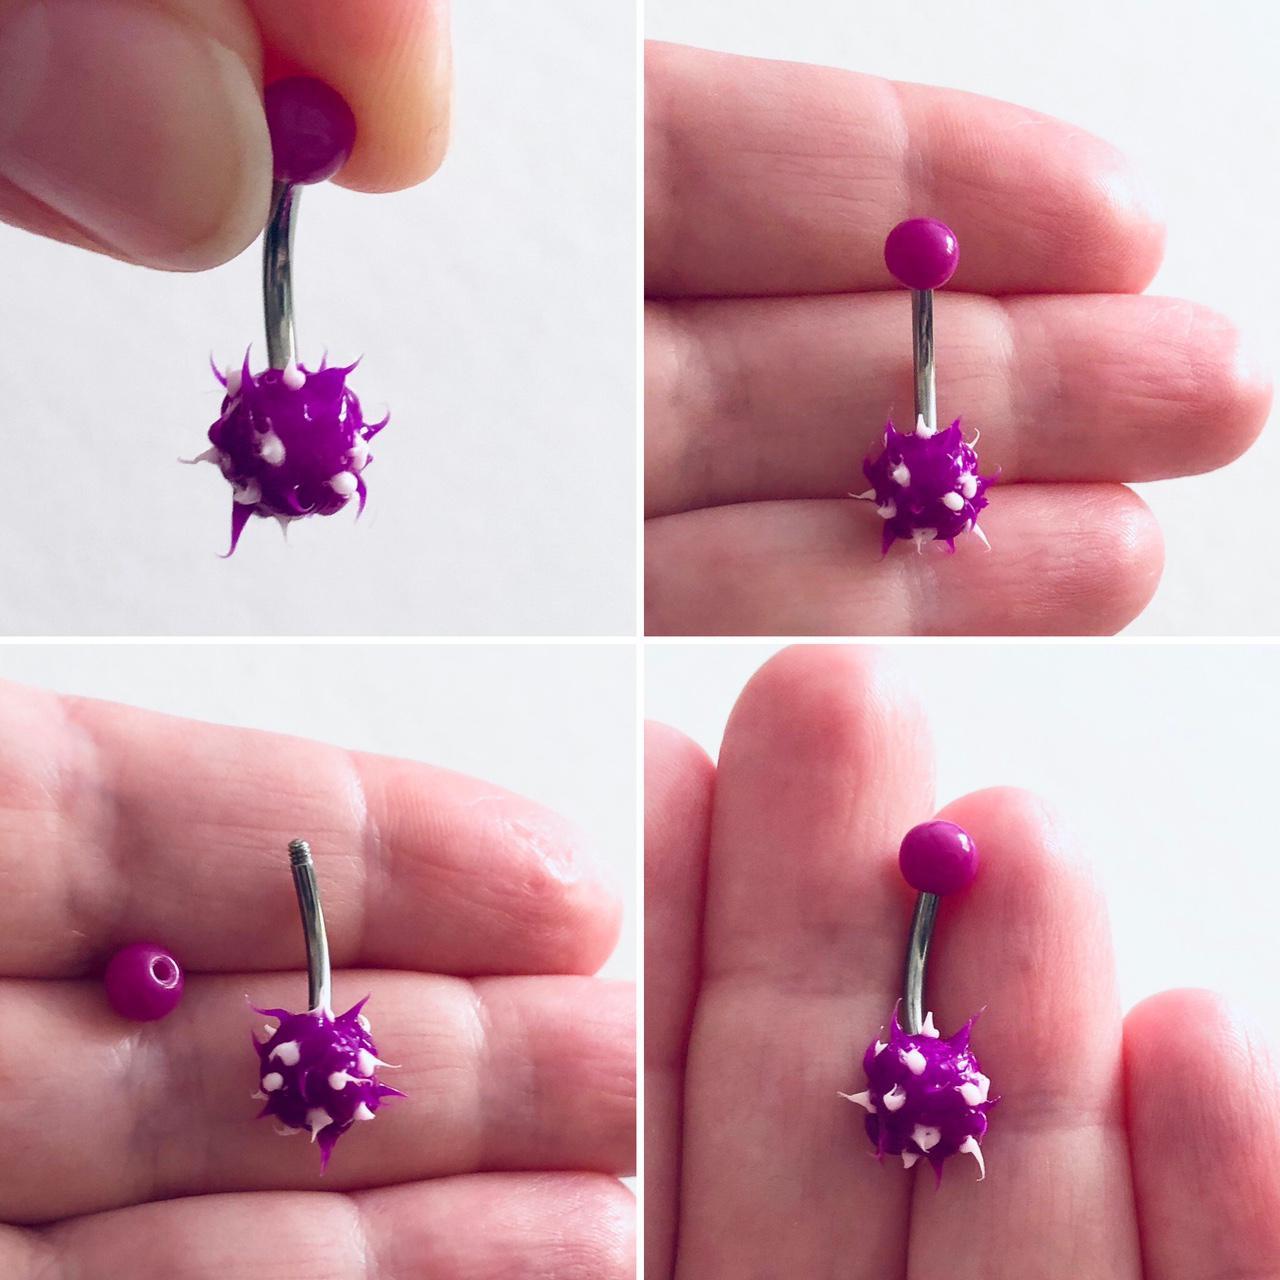 Belly Button Ring Navel Piercing with Spike Silicone Ball 